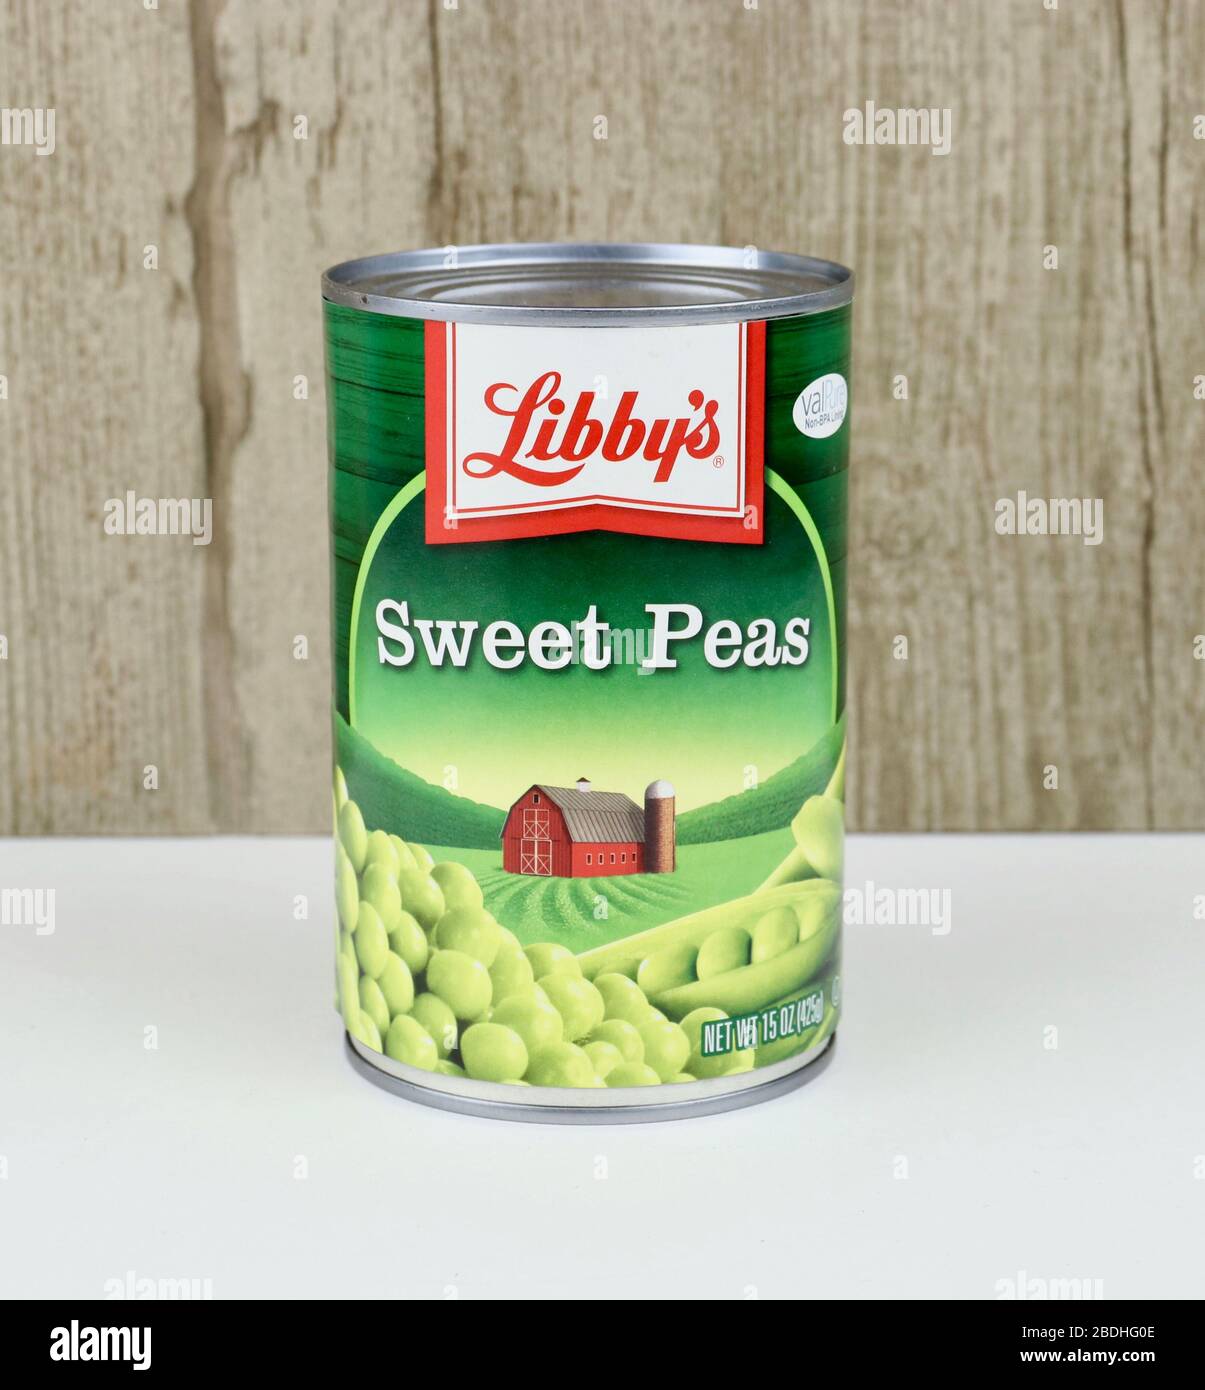 Spencer, Wisconsin, U.S.A. , April, 8, 2020    Can of Libby's Sweet Peas    Libby's was first introduced in 1869 and is Headquartered in Chicago Ill. Stock Photo